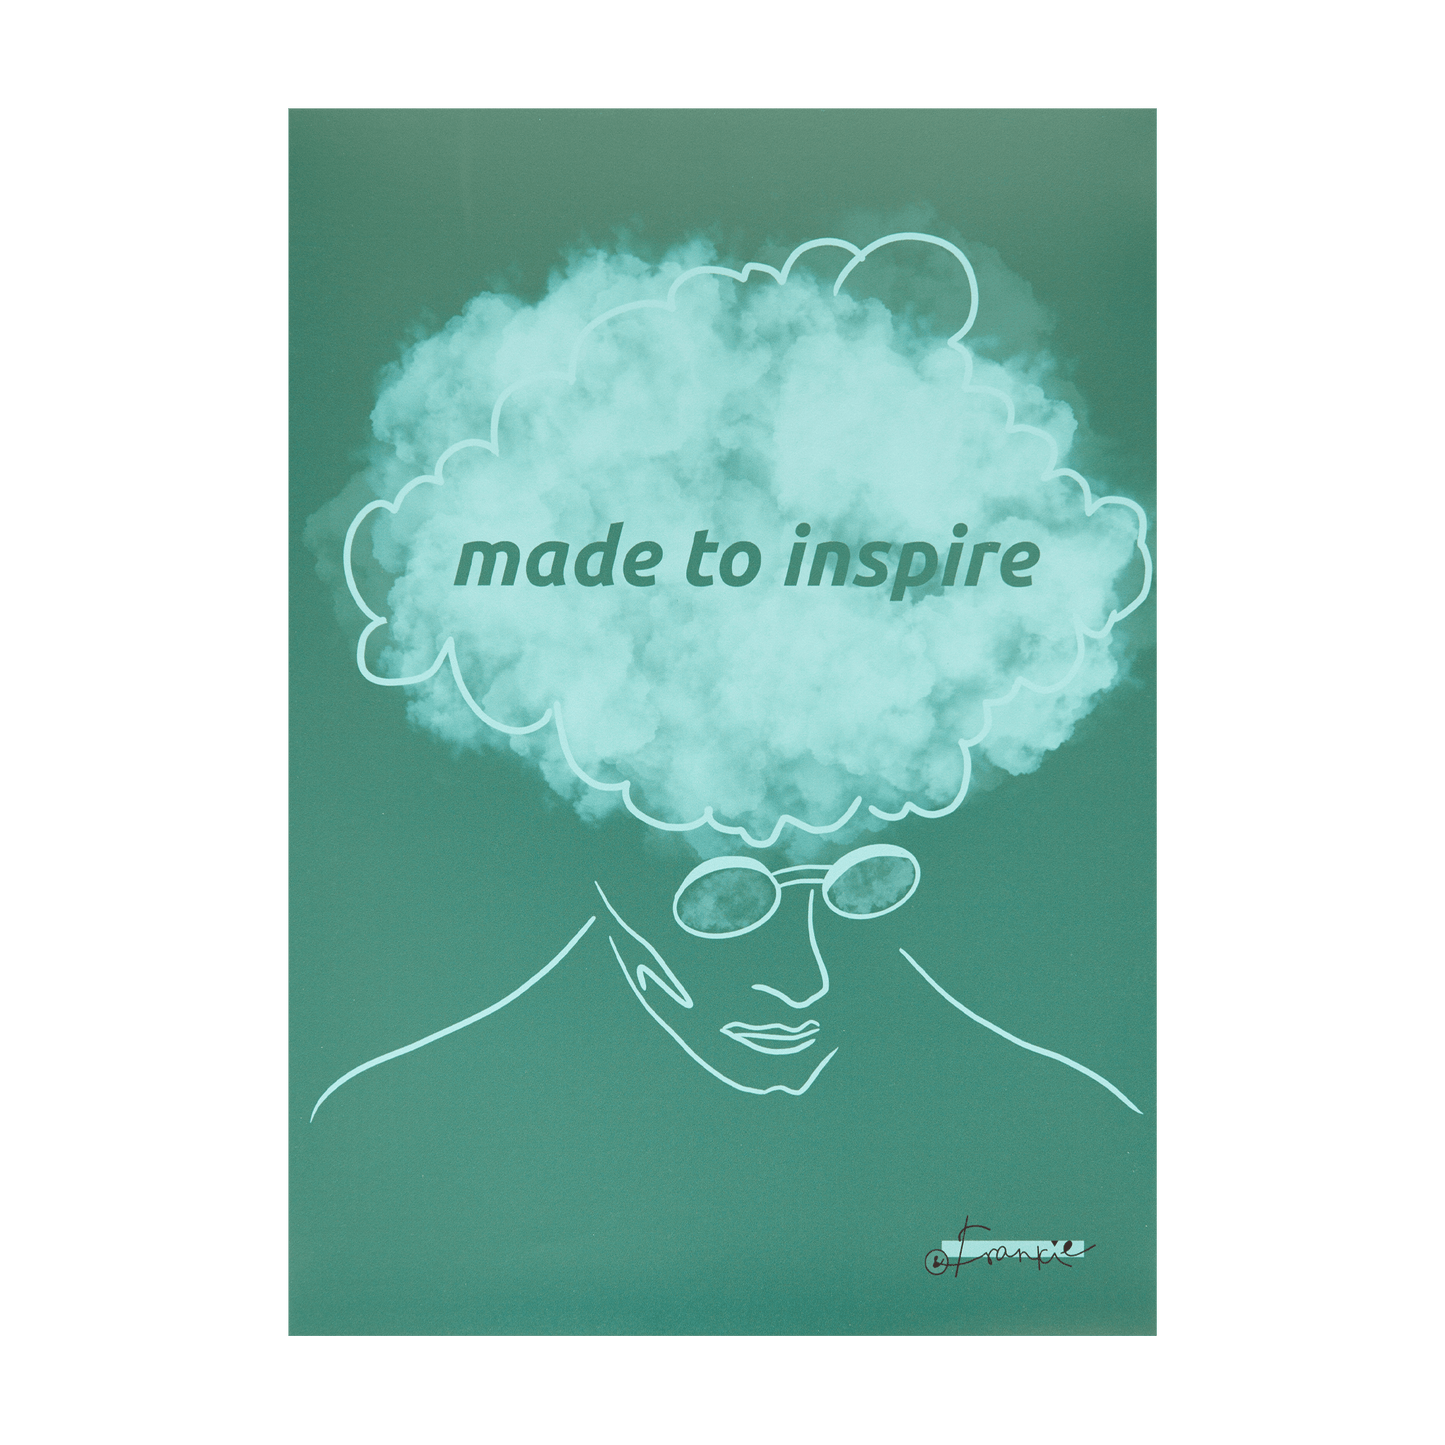 "Made to inspire" poster